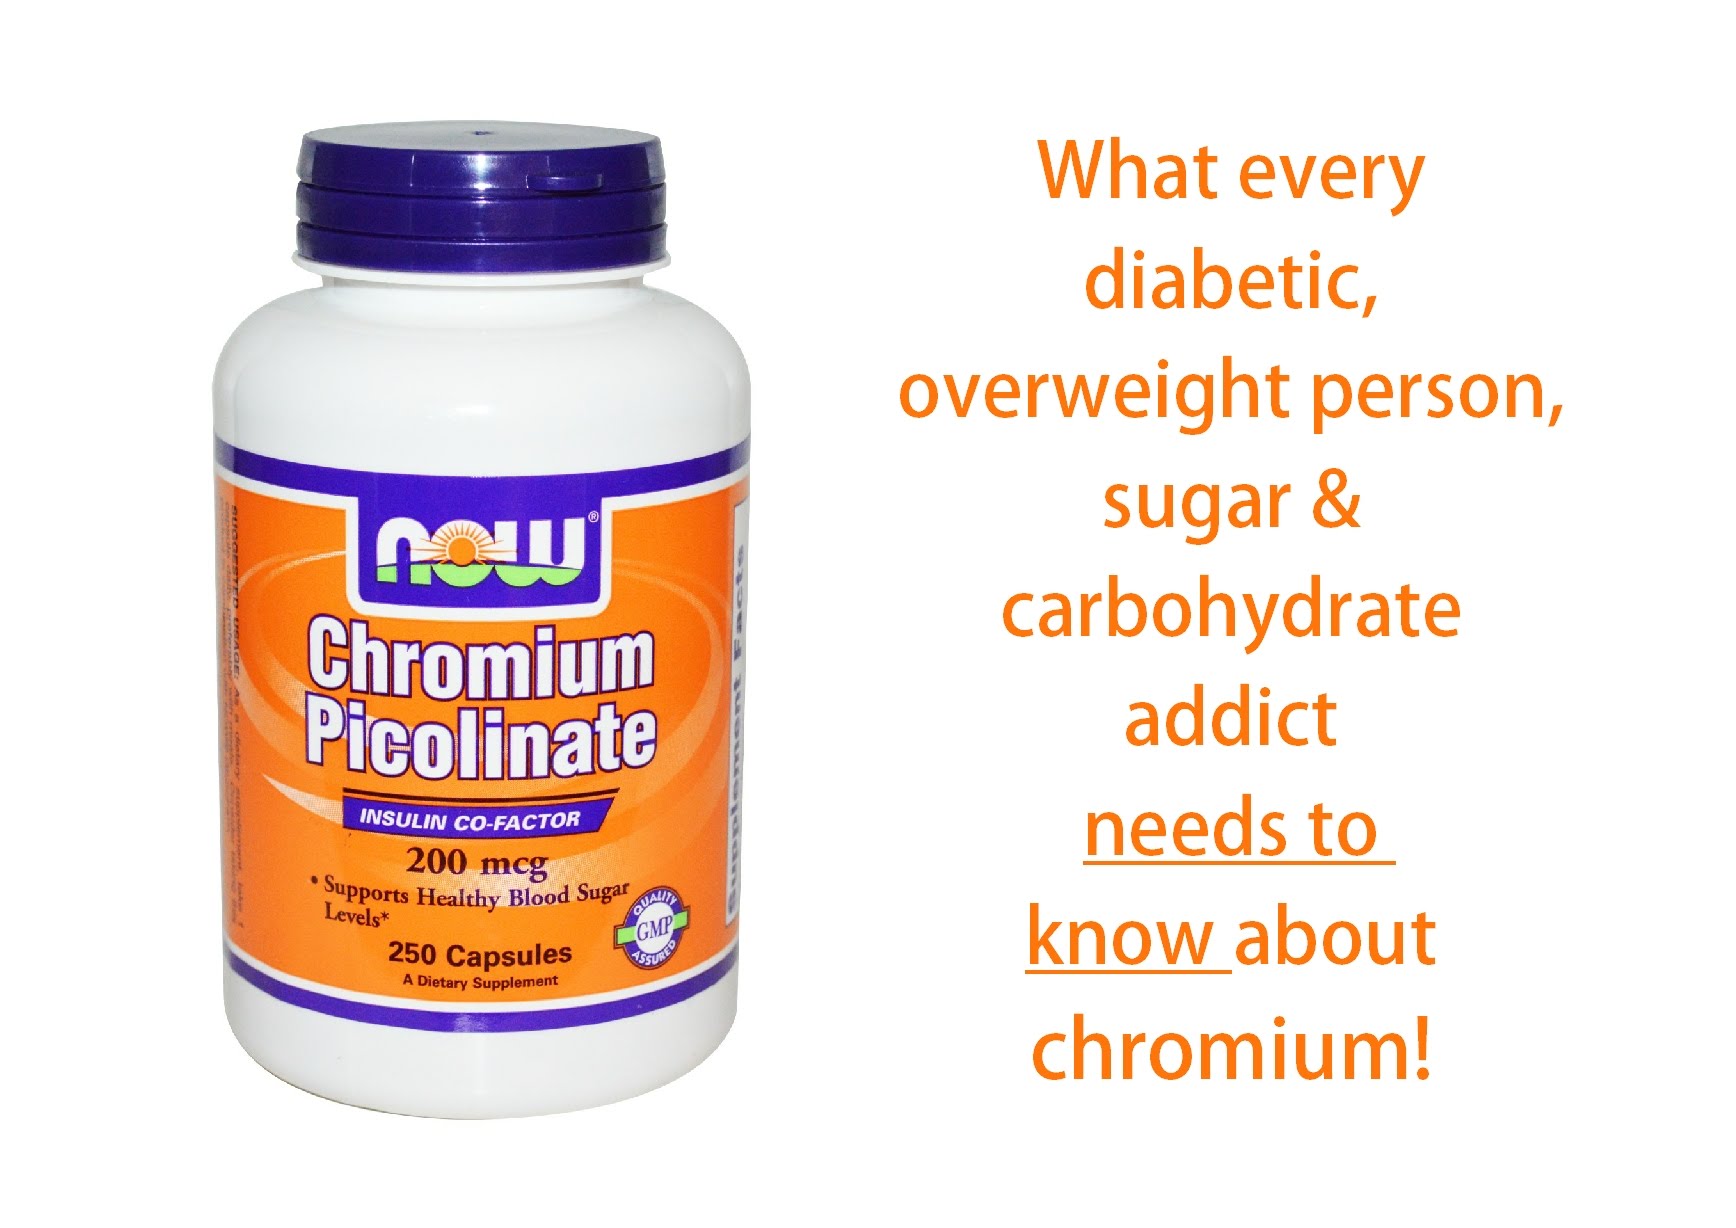 Lose Weight, Overcome Sugar Addiction With Chromium - YouTube